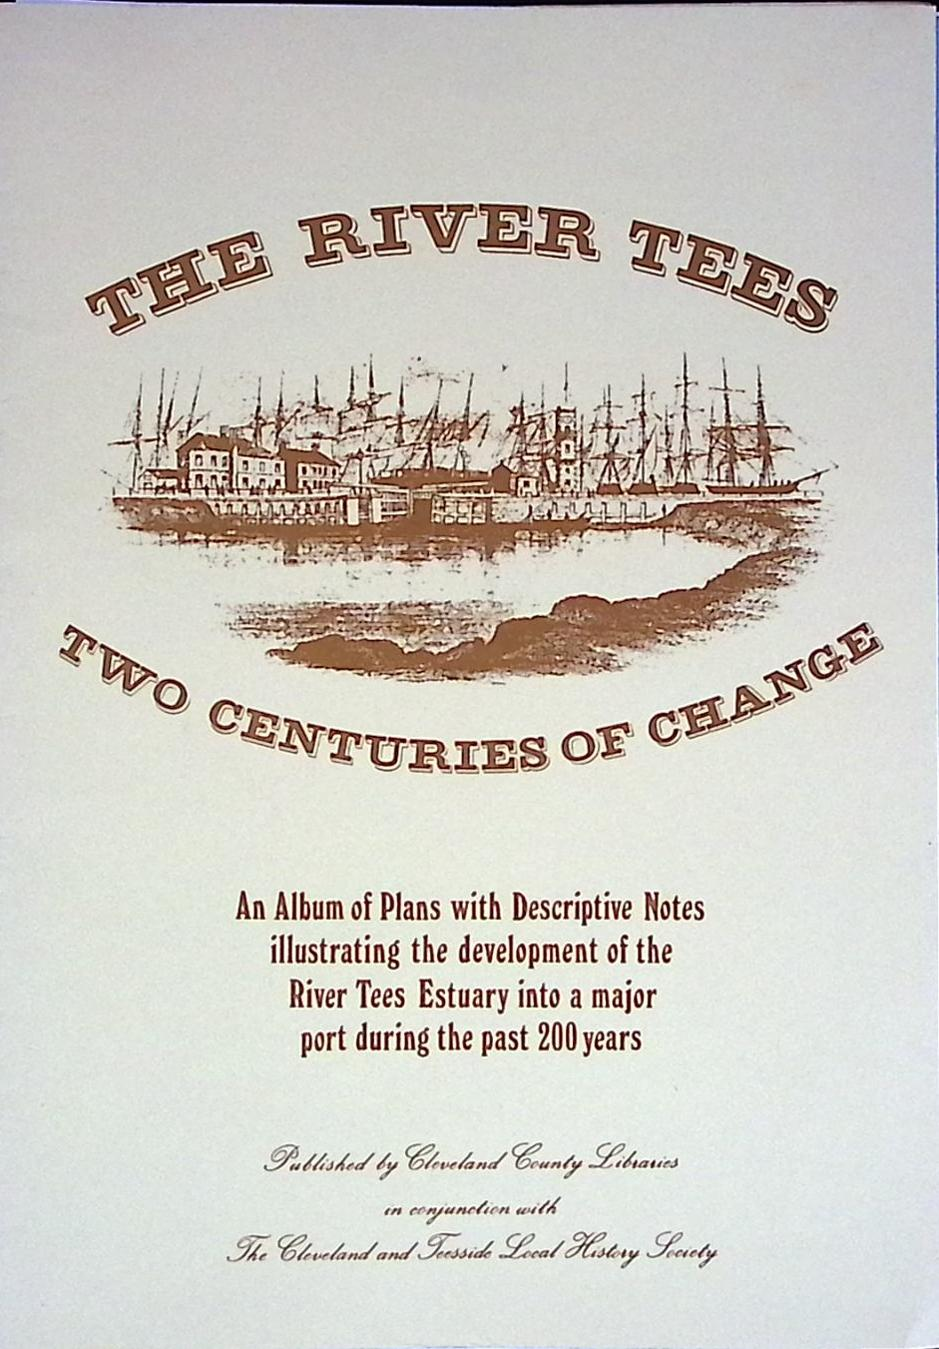 The River Tees. Two Centuries of Change.